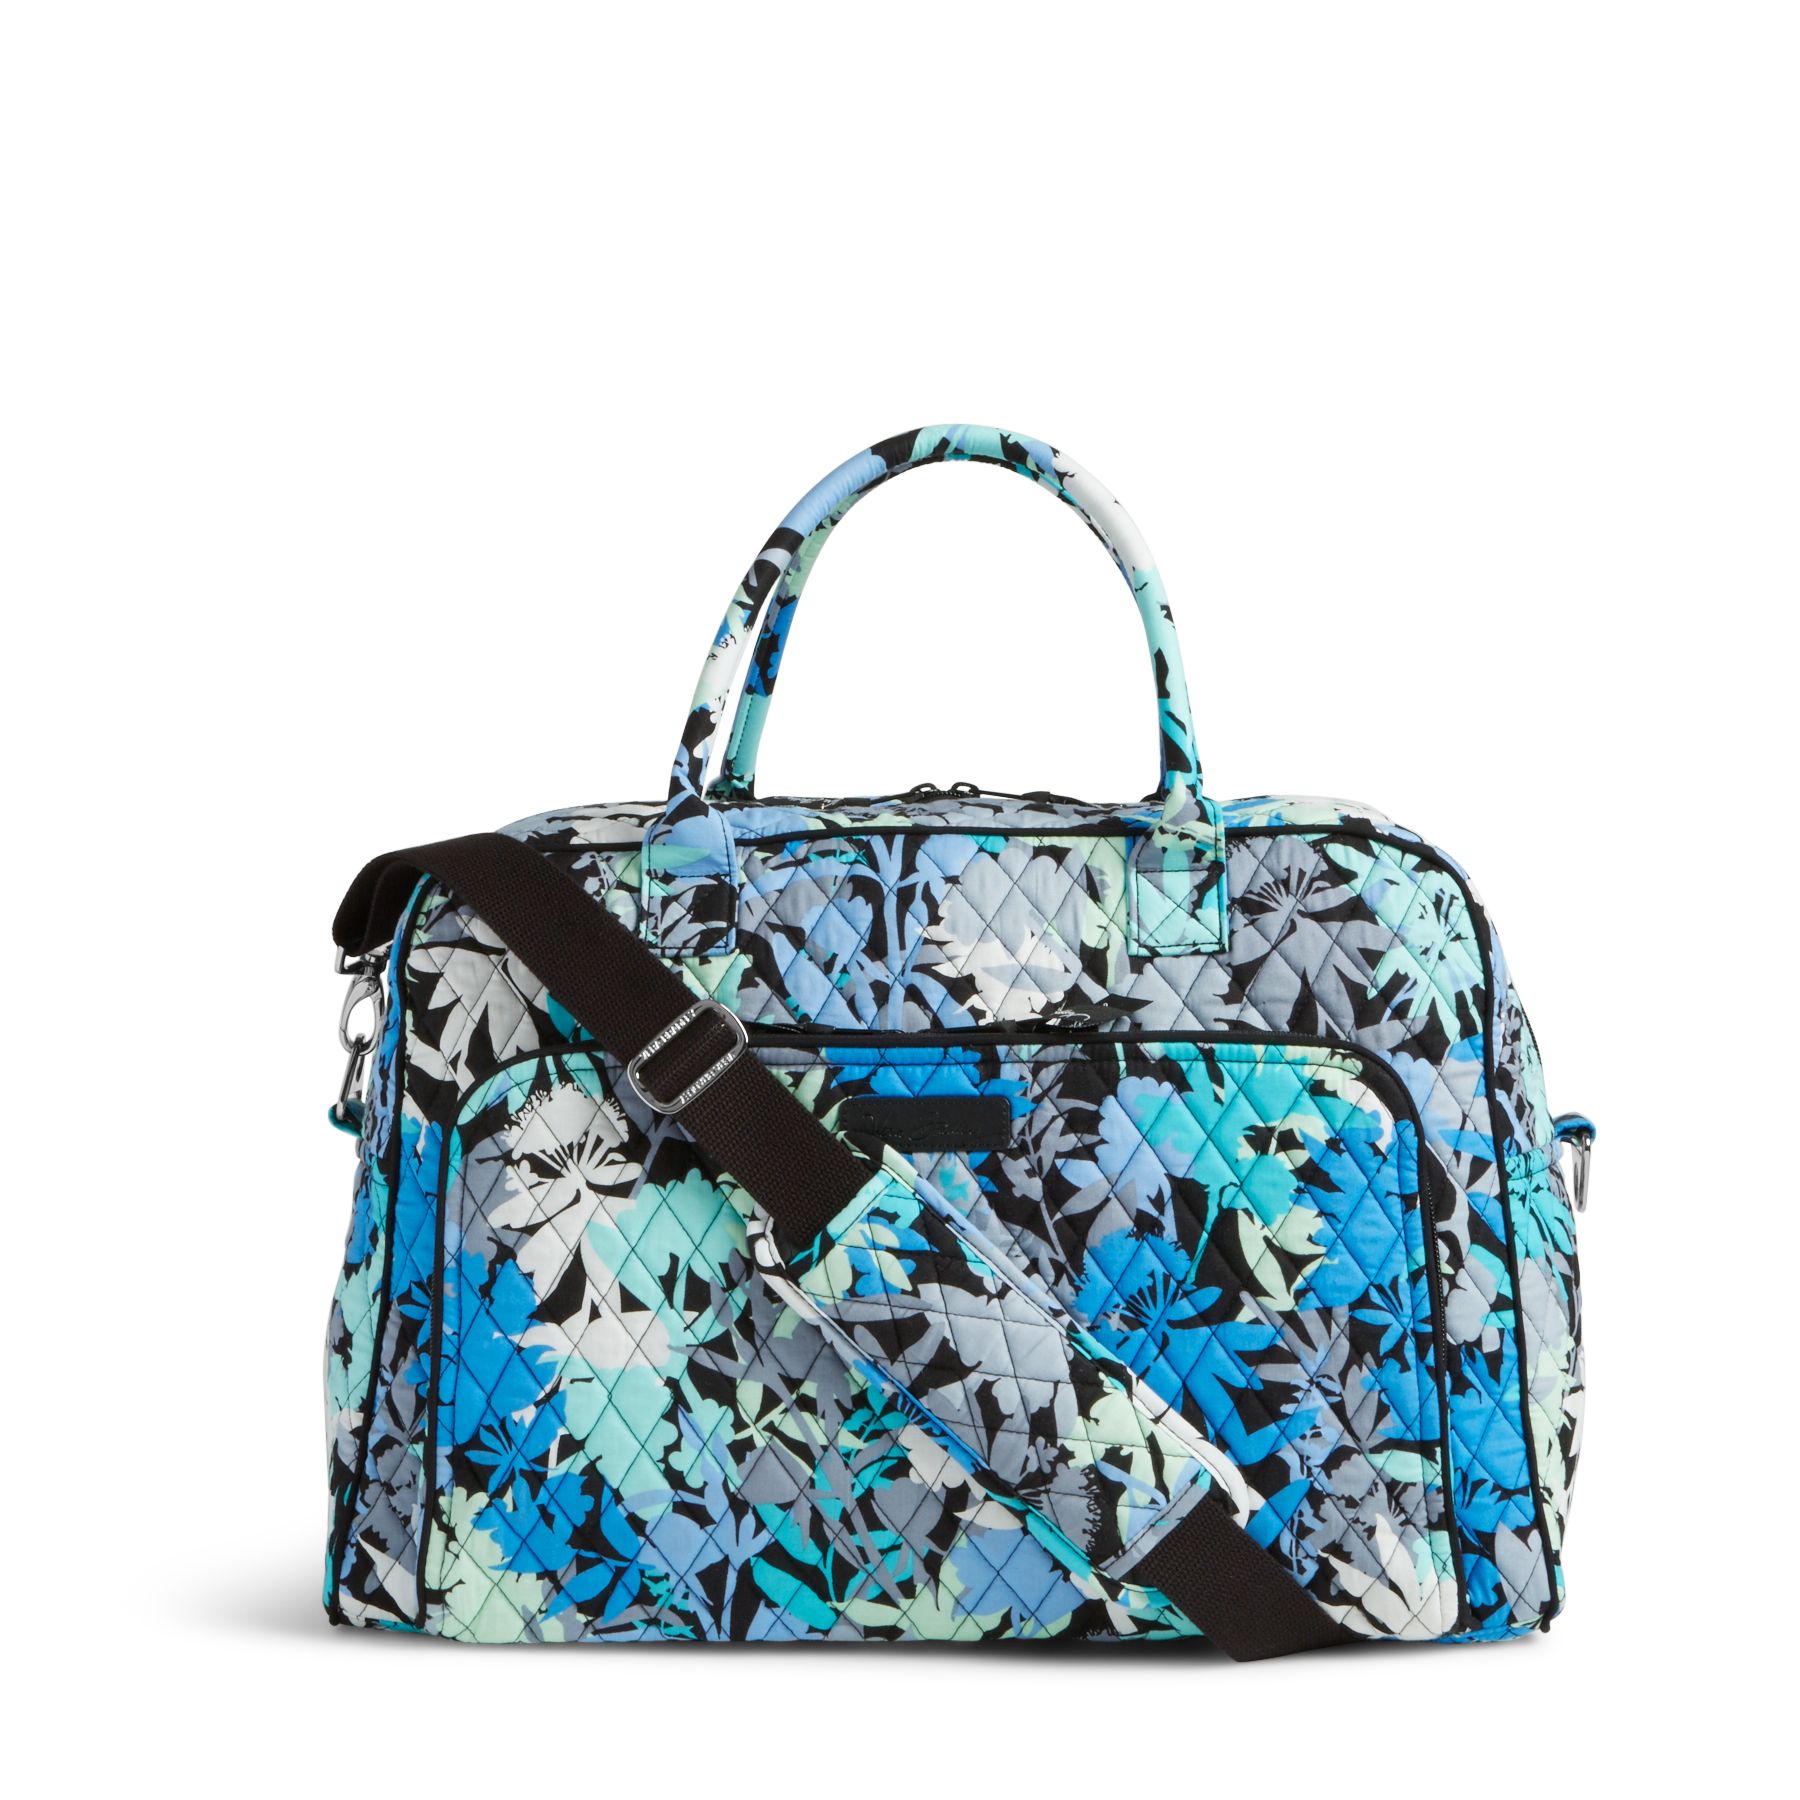 Vera bradley Coupon Code With Holiday SALE 50% OFF SELECT PATTERNS